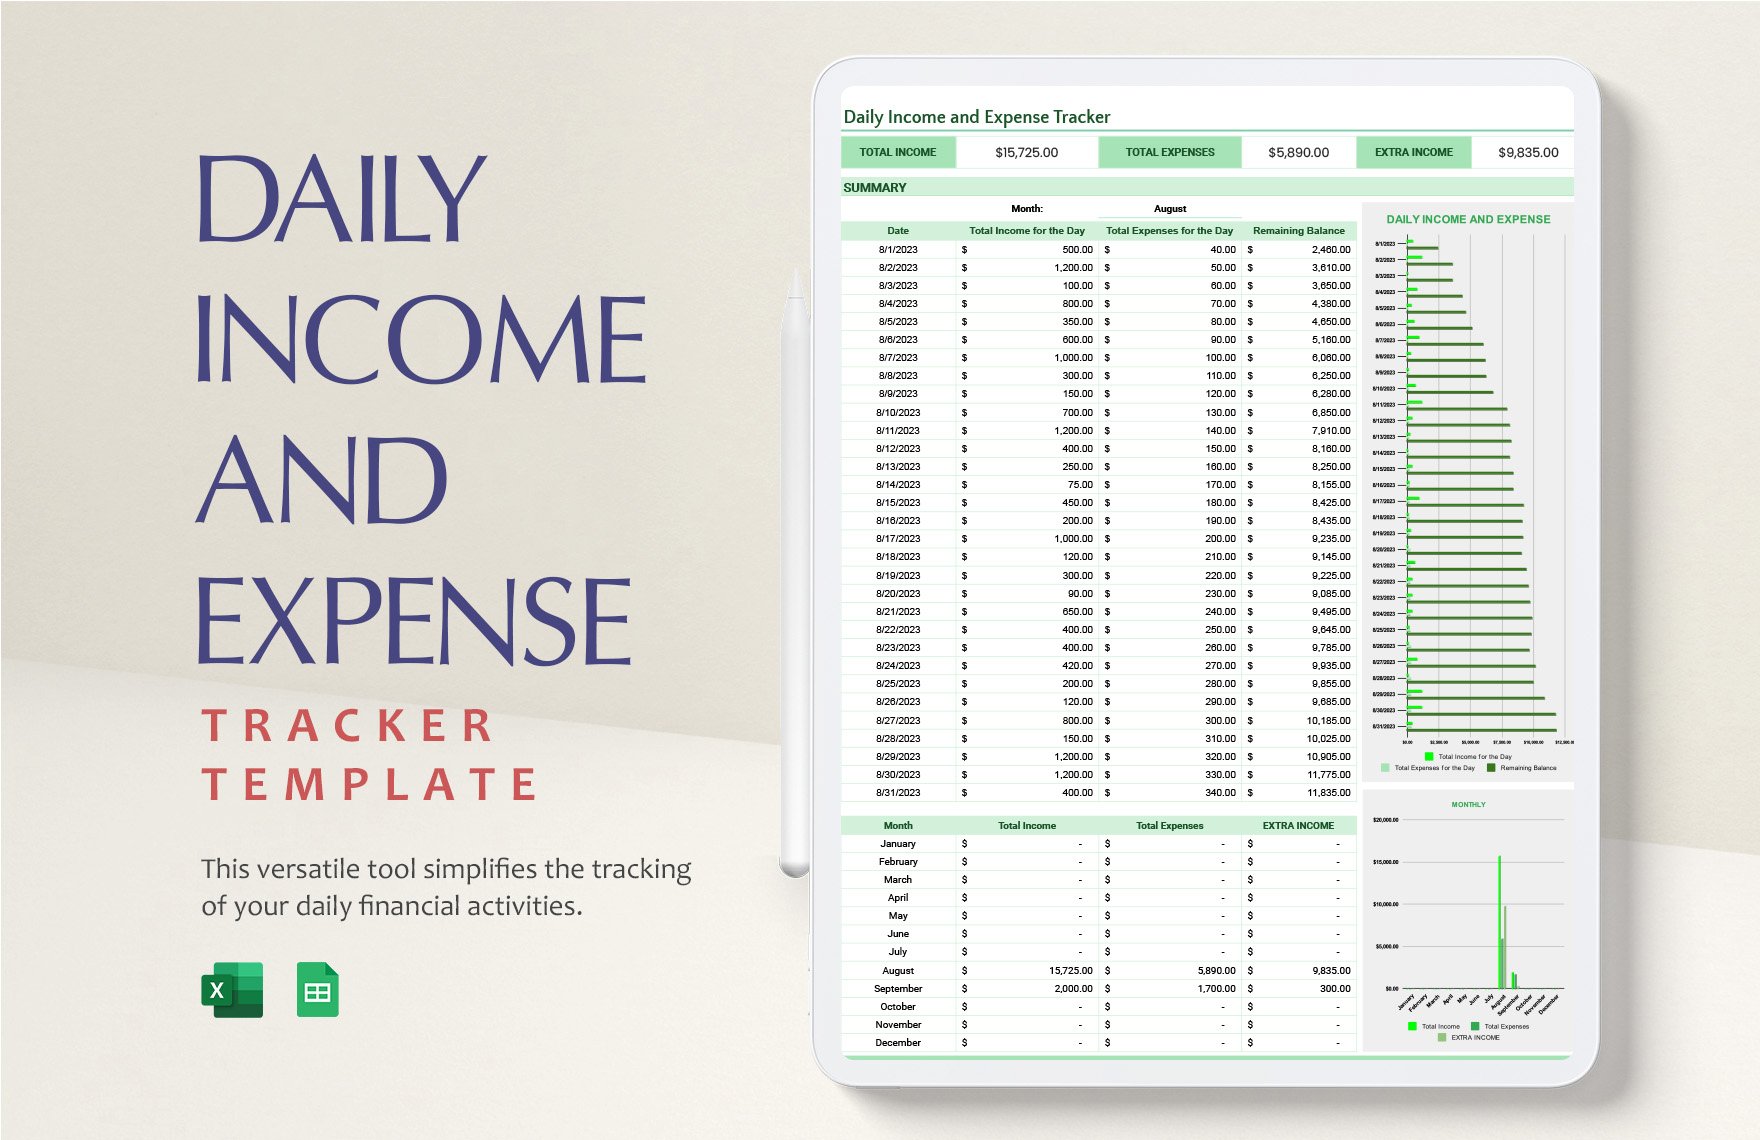 Daily Income and Expense Tracker Template in Excel, Google Sheets